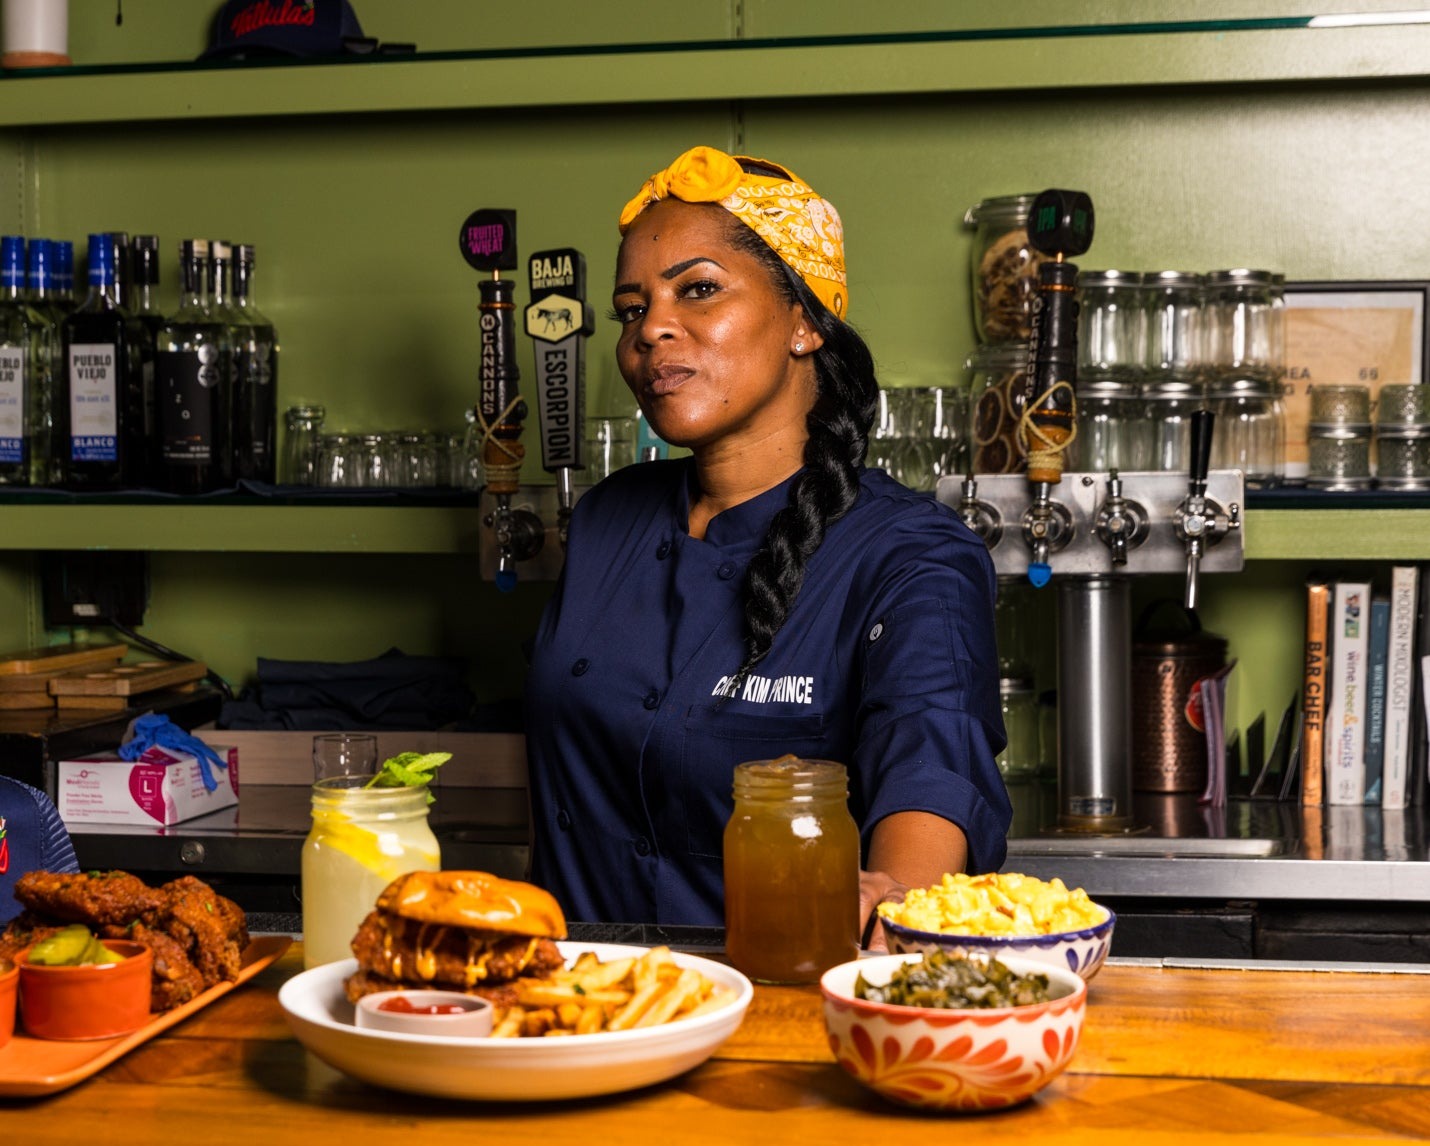 Burning Tales Of Nashville Hot Chicken: A Southern Style Feast by Chef Kim Prince